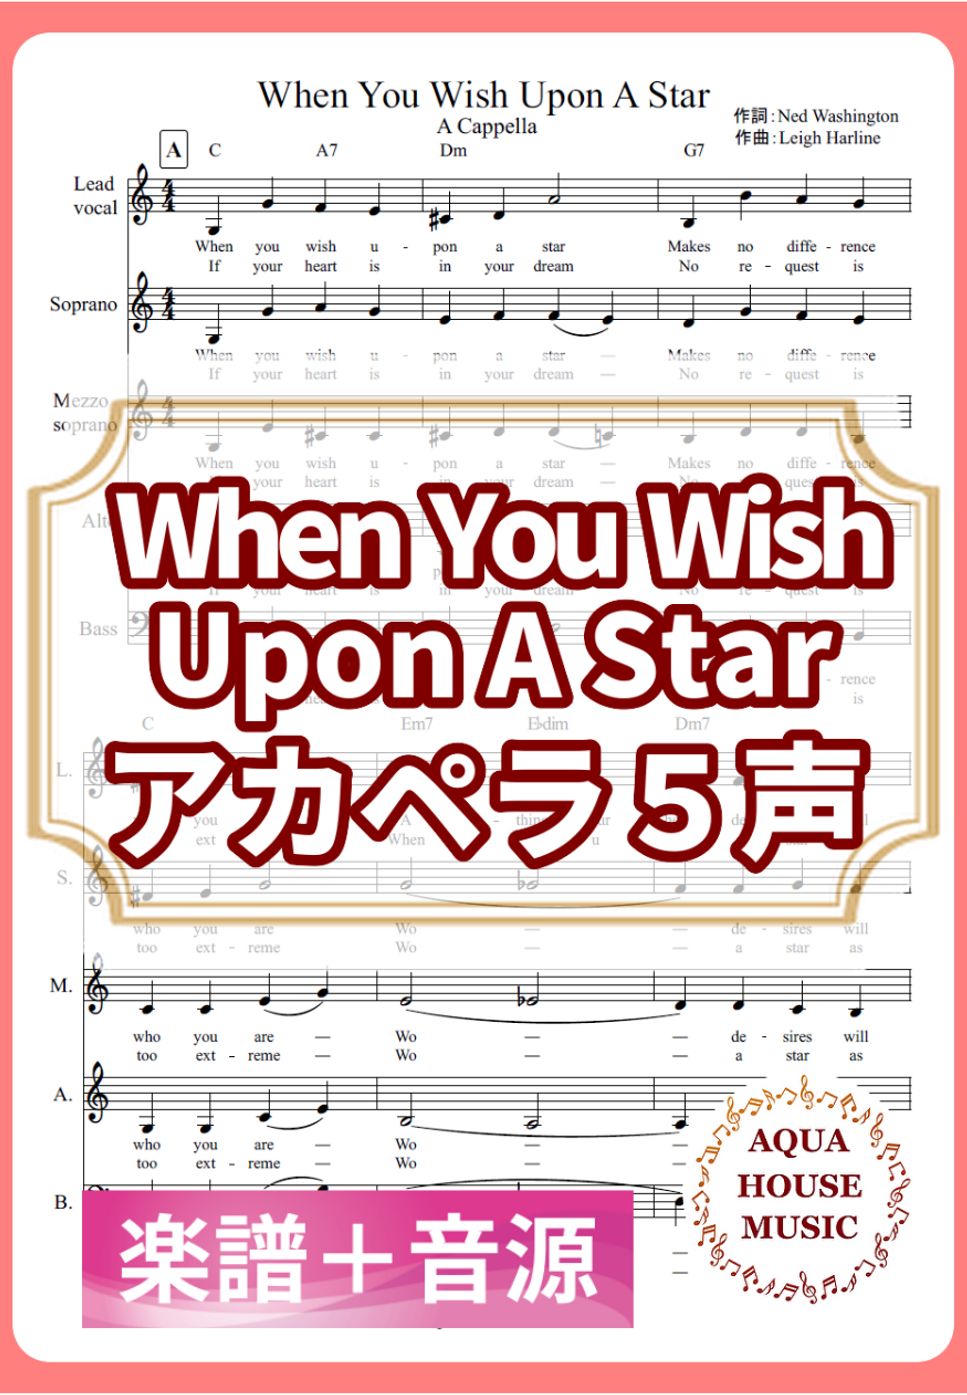 Leigh Harline - When You Wish Upon A Star(星に願いを) (アカペラ楽譜＋練習音源セット販売) by 飯田 亜紗子